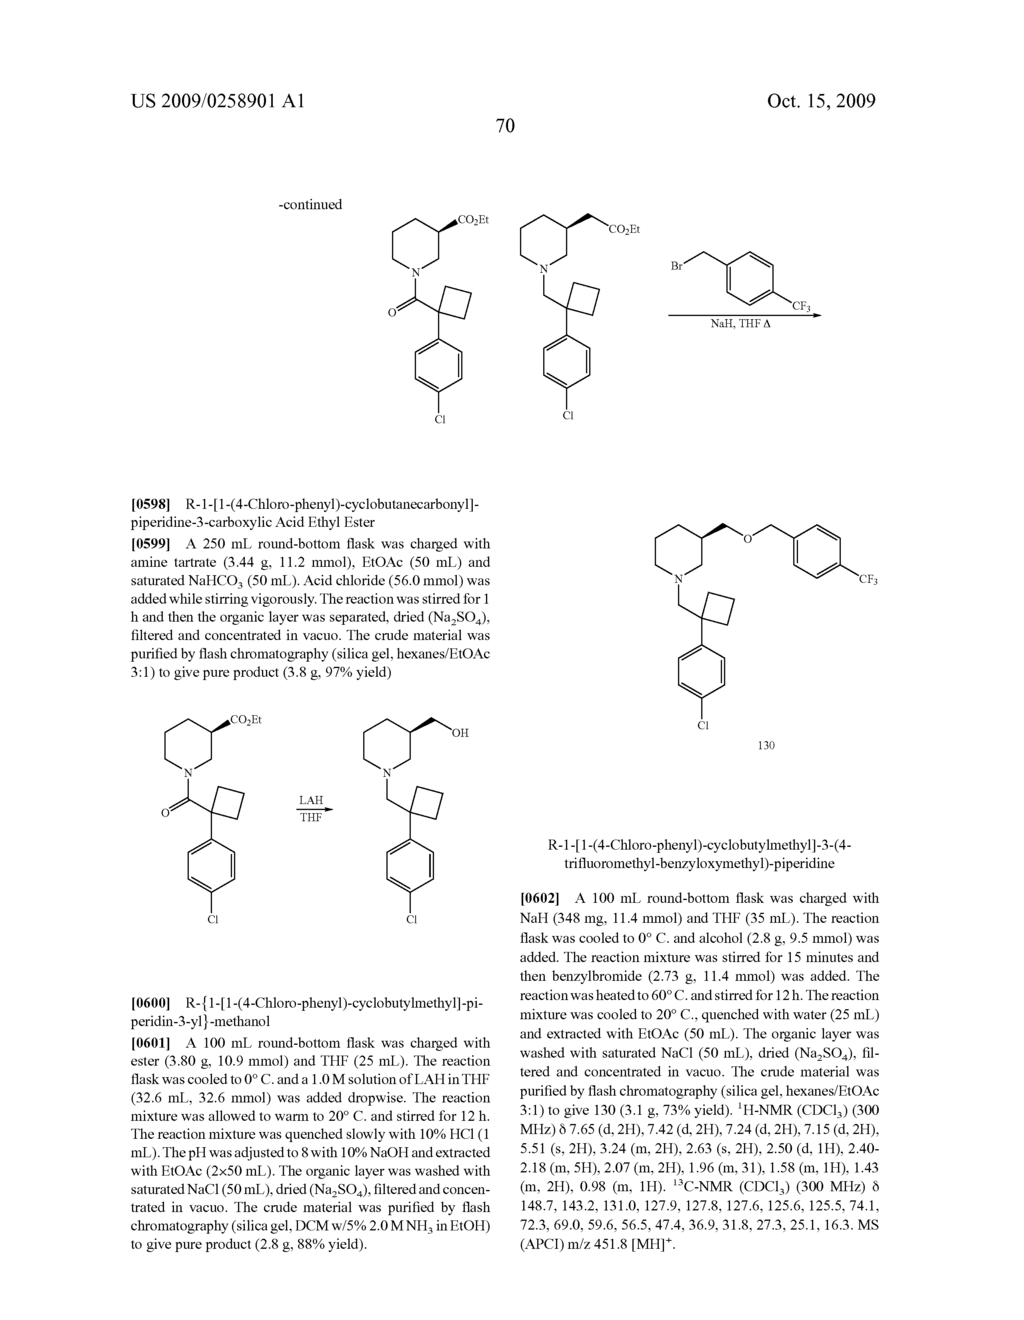 LIGANDS FOR MONOAMINE RECEPTORS AND TRANSPORTERS, AND METHODS OF USE THEREOF - diagram, schematic, and image 72